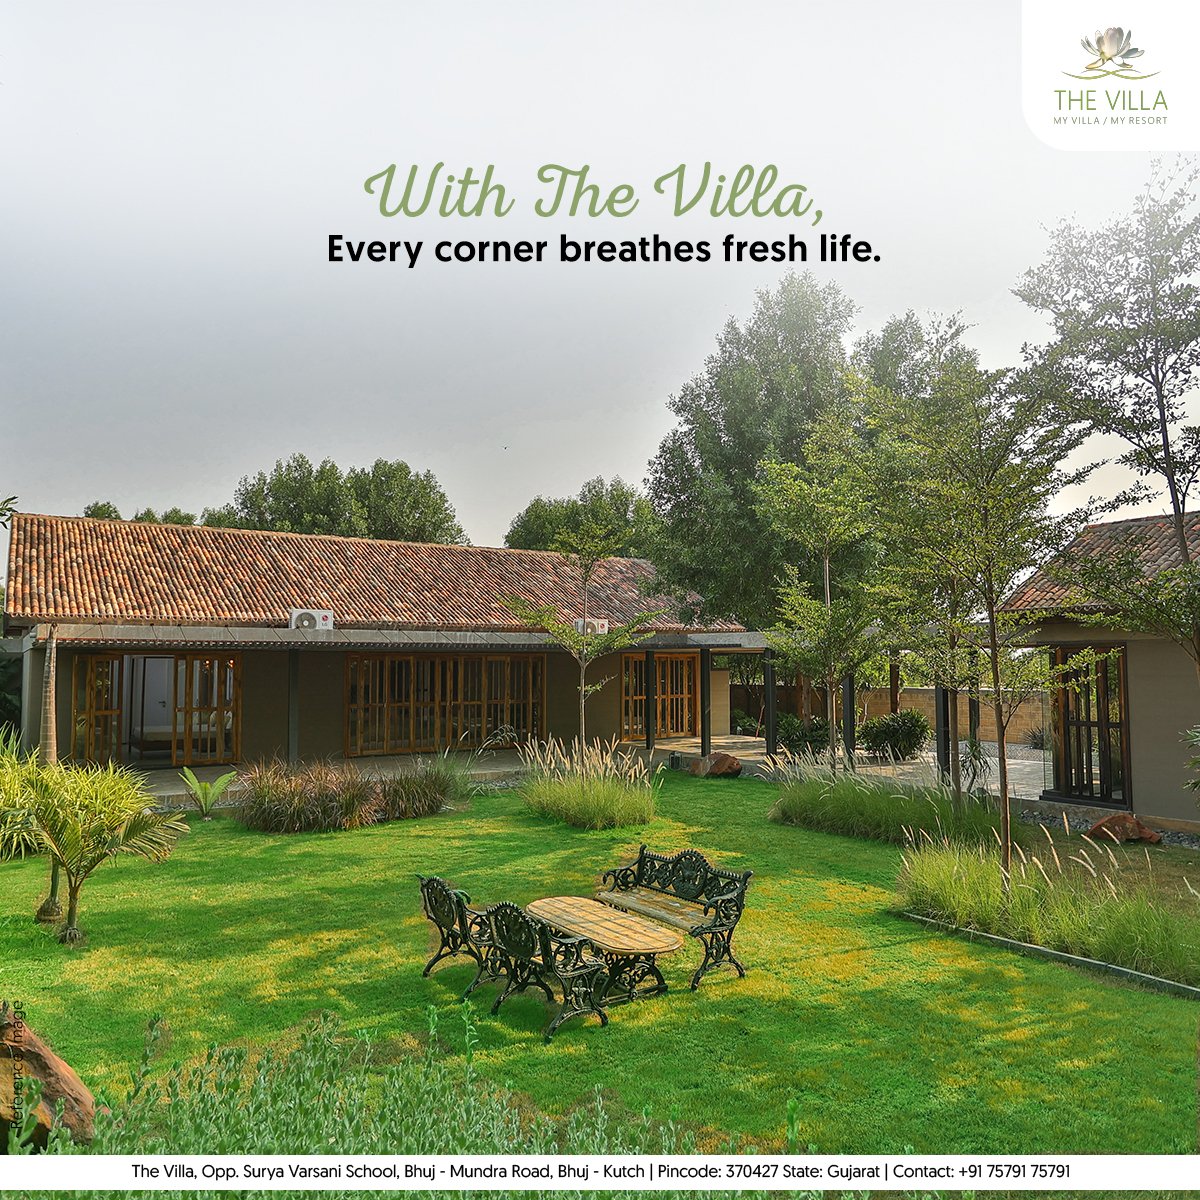 Embrace a green lifestyle at The Villa, where nature seamlessly blends with luxury, striking a perfect balance between modern comfort and eco-conscious living.

#TheVilla #TheVillaExperience #UnmatchedElegance #ConvenienceRedefined #PremiumResidence  #RealEstate #Gujarat #Bhuj